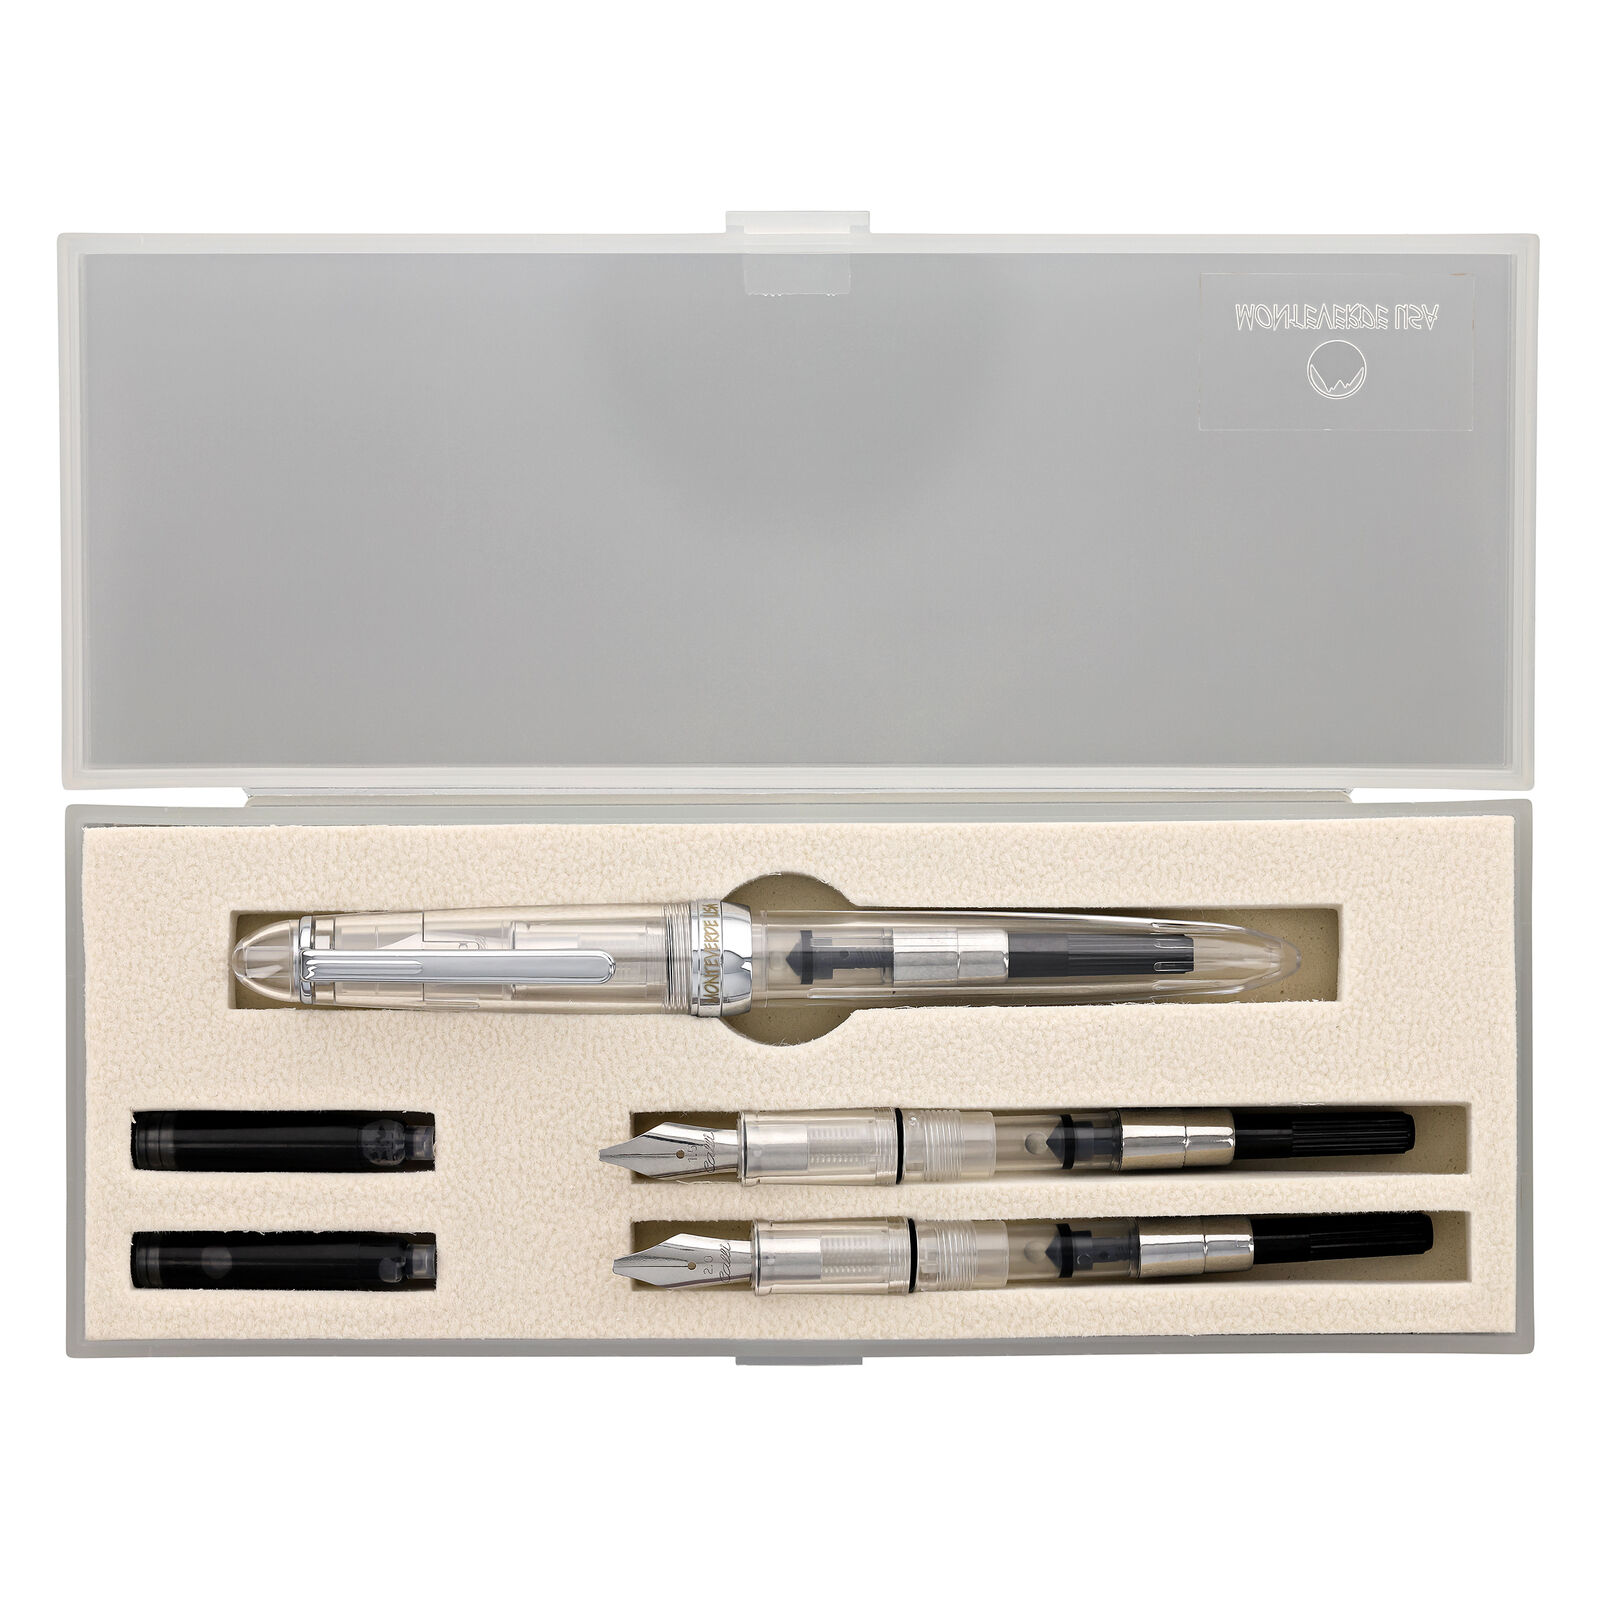 Monteverde Monza ID Fountain Pen in Clear - Calligraphy Set - NEW in Box